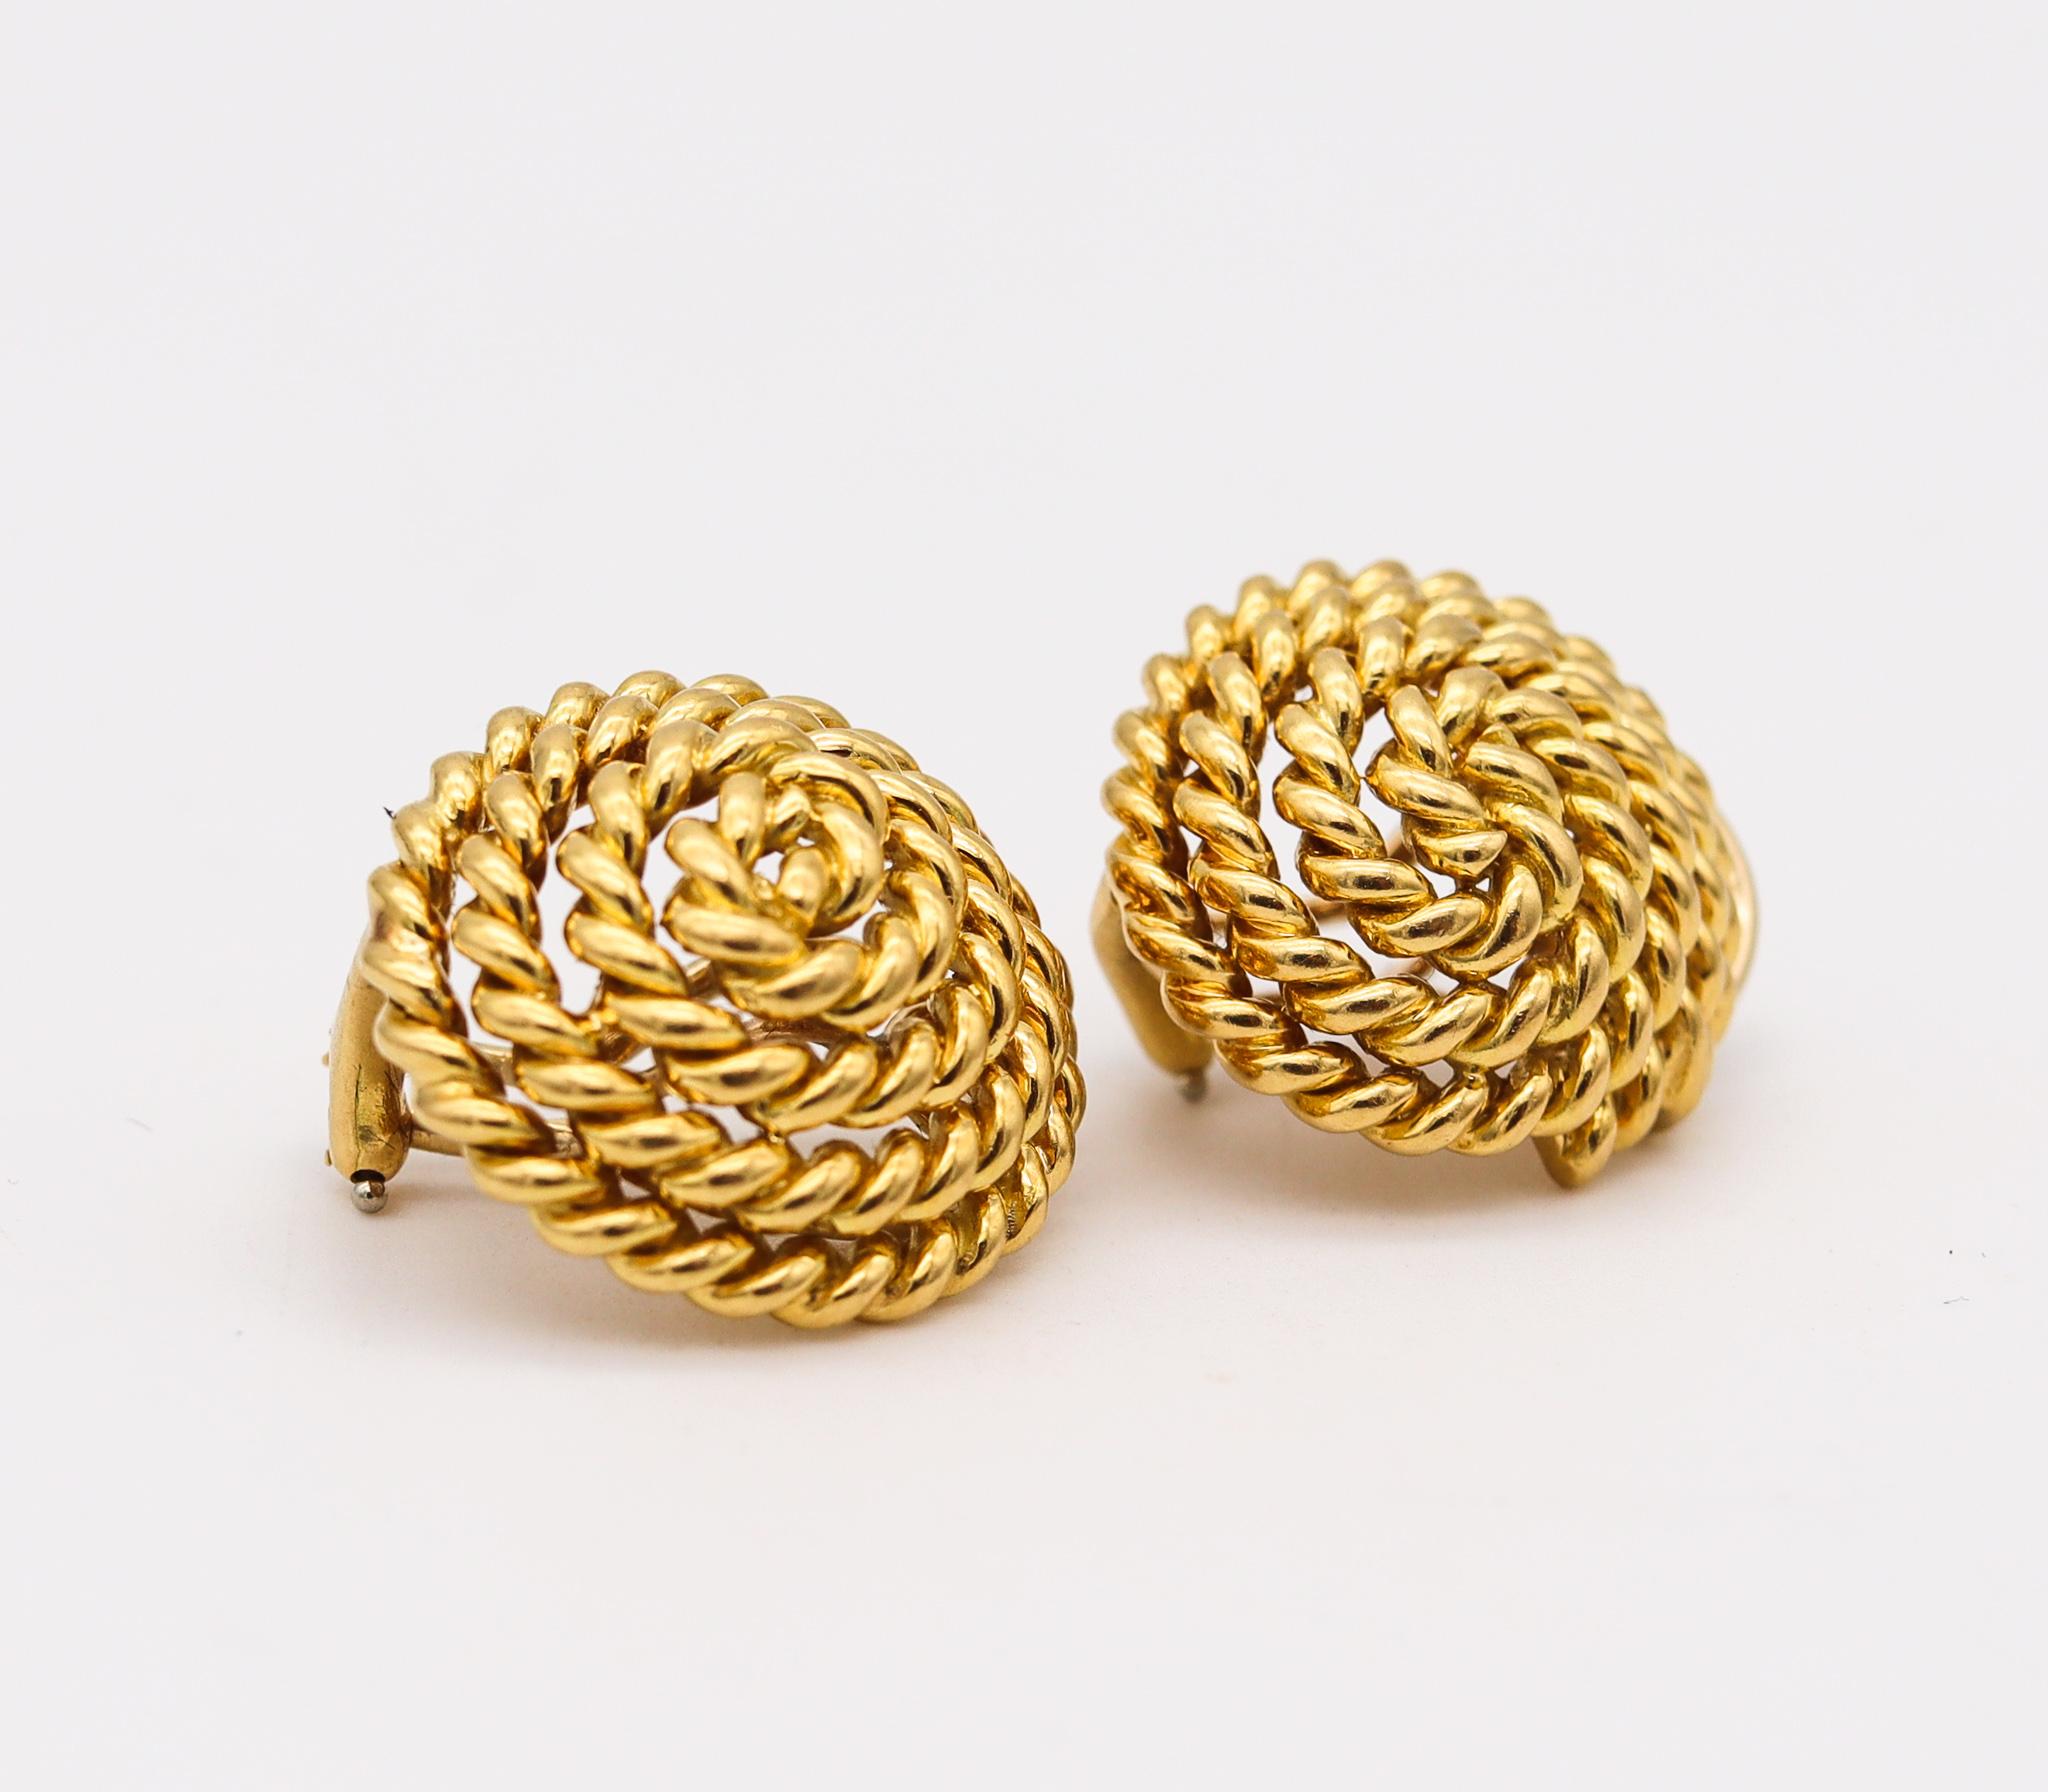 Modernist Tiffany & Co. 1985Schlumberger Design Twisted Ropes Earrings In 18Kt YellowGold